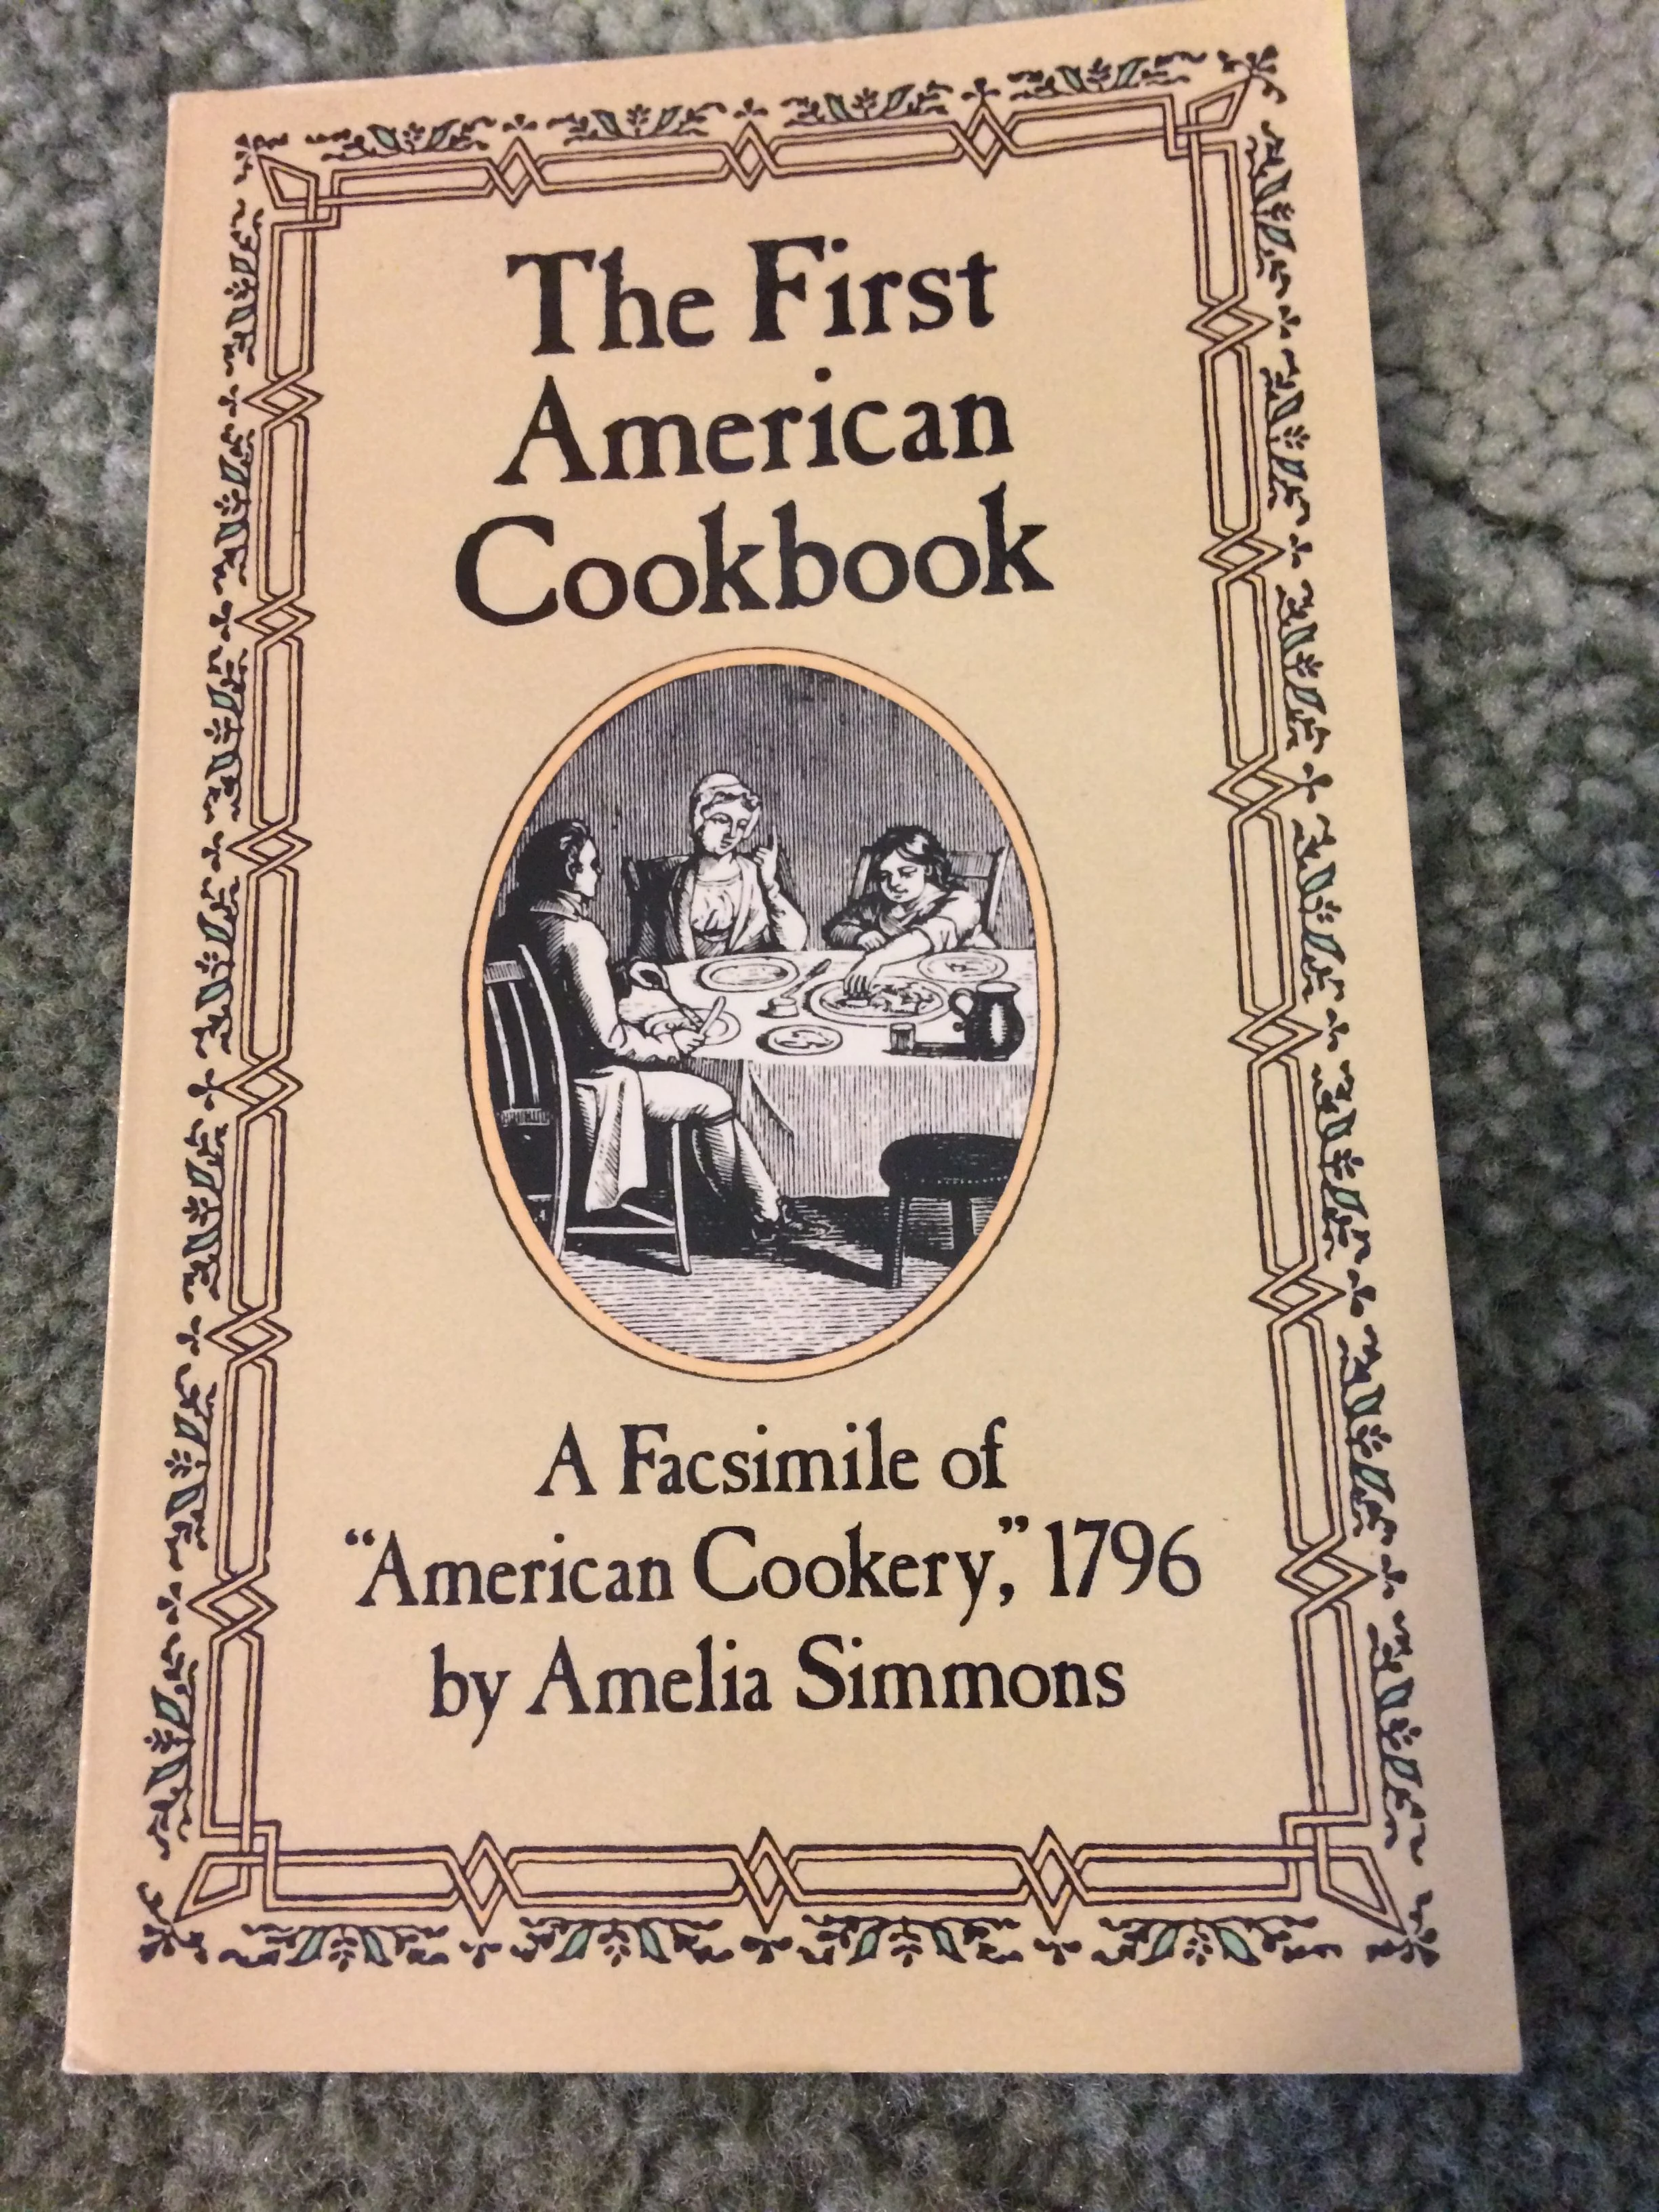 What was food like during colonial times in the US?